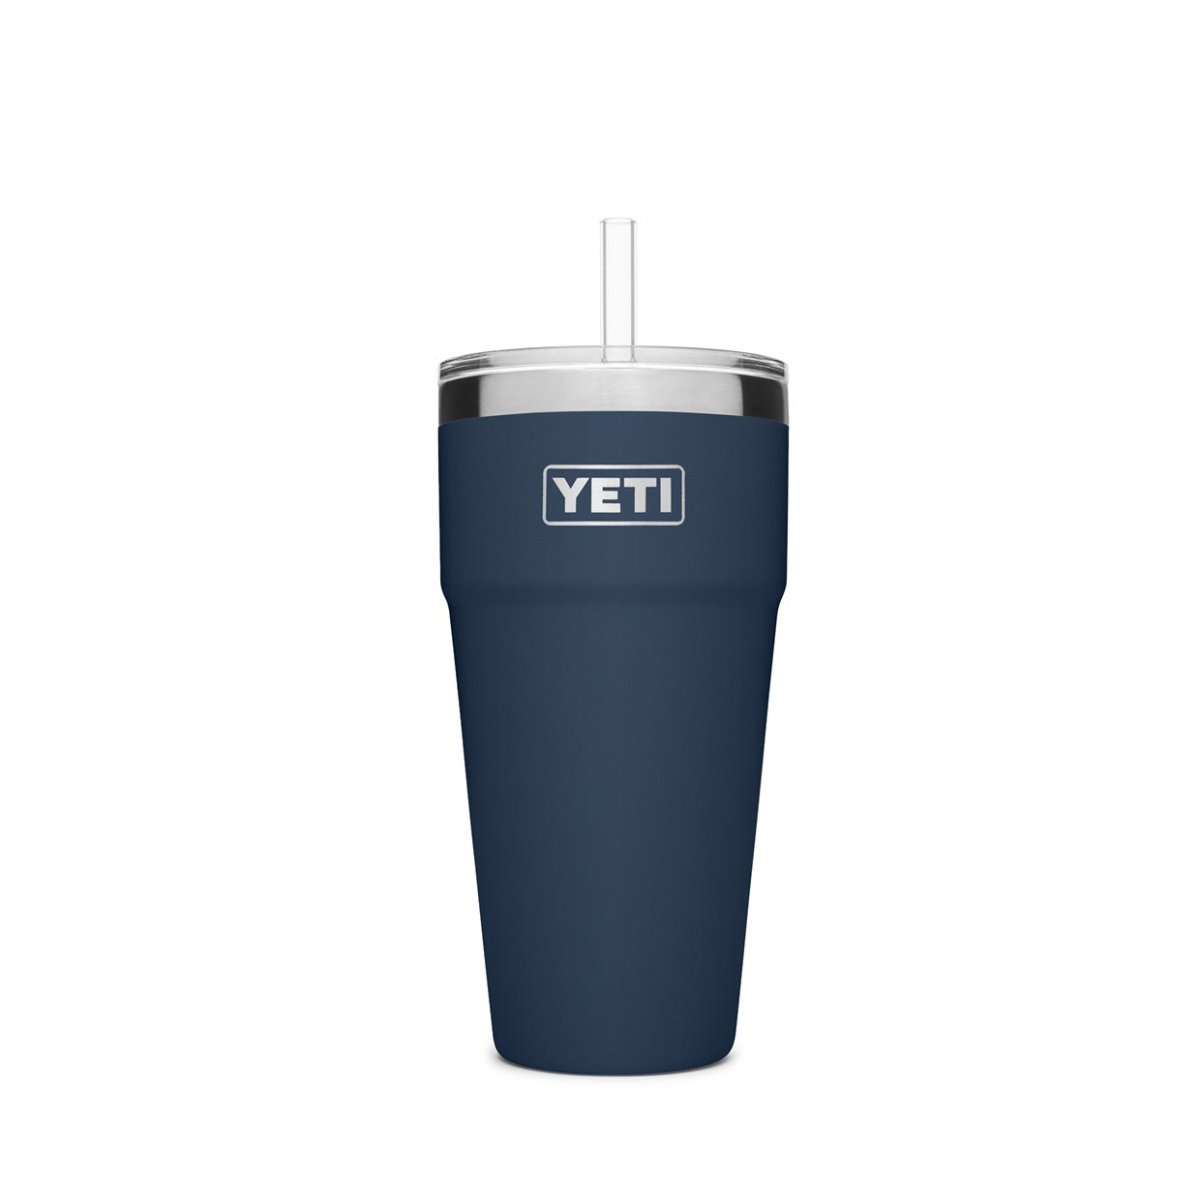 Shop YETI coolers on Morning Read's online pro shop.